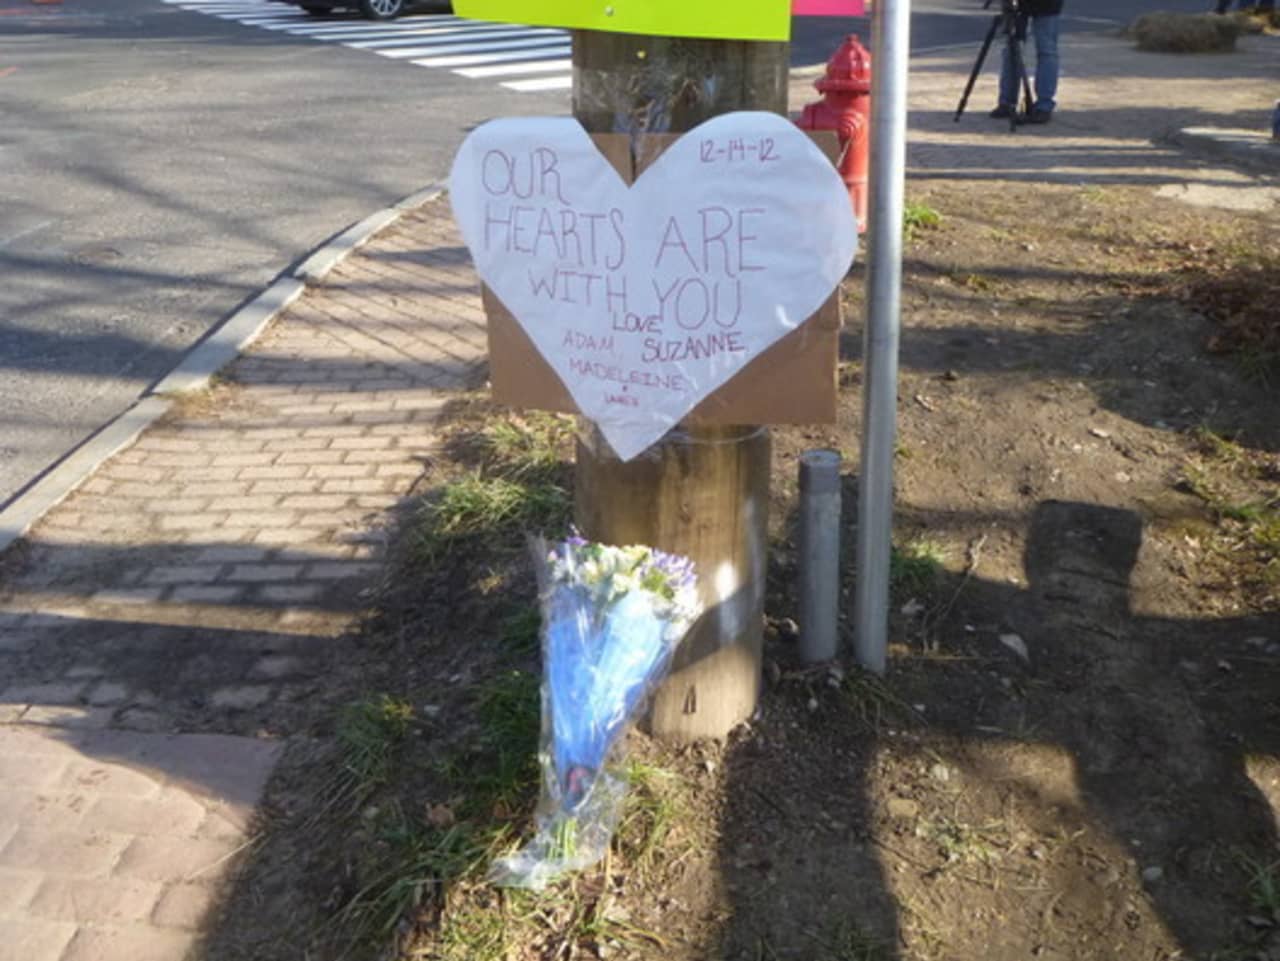 Memorials appeared throughout Newtown after the shooting at Sandy Hook Elementary School.